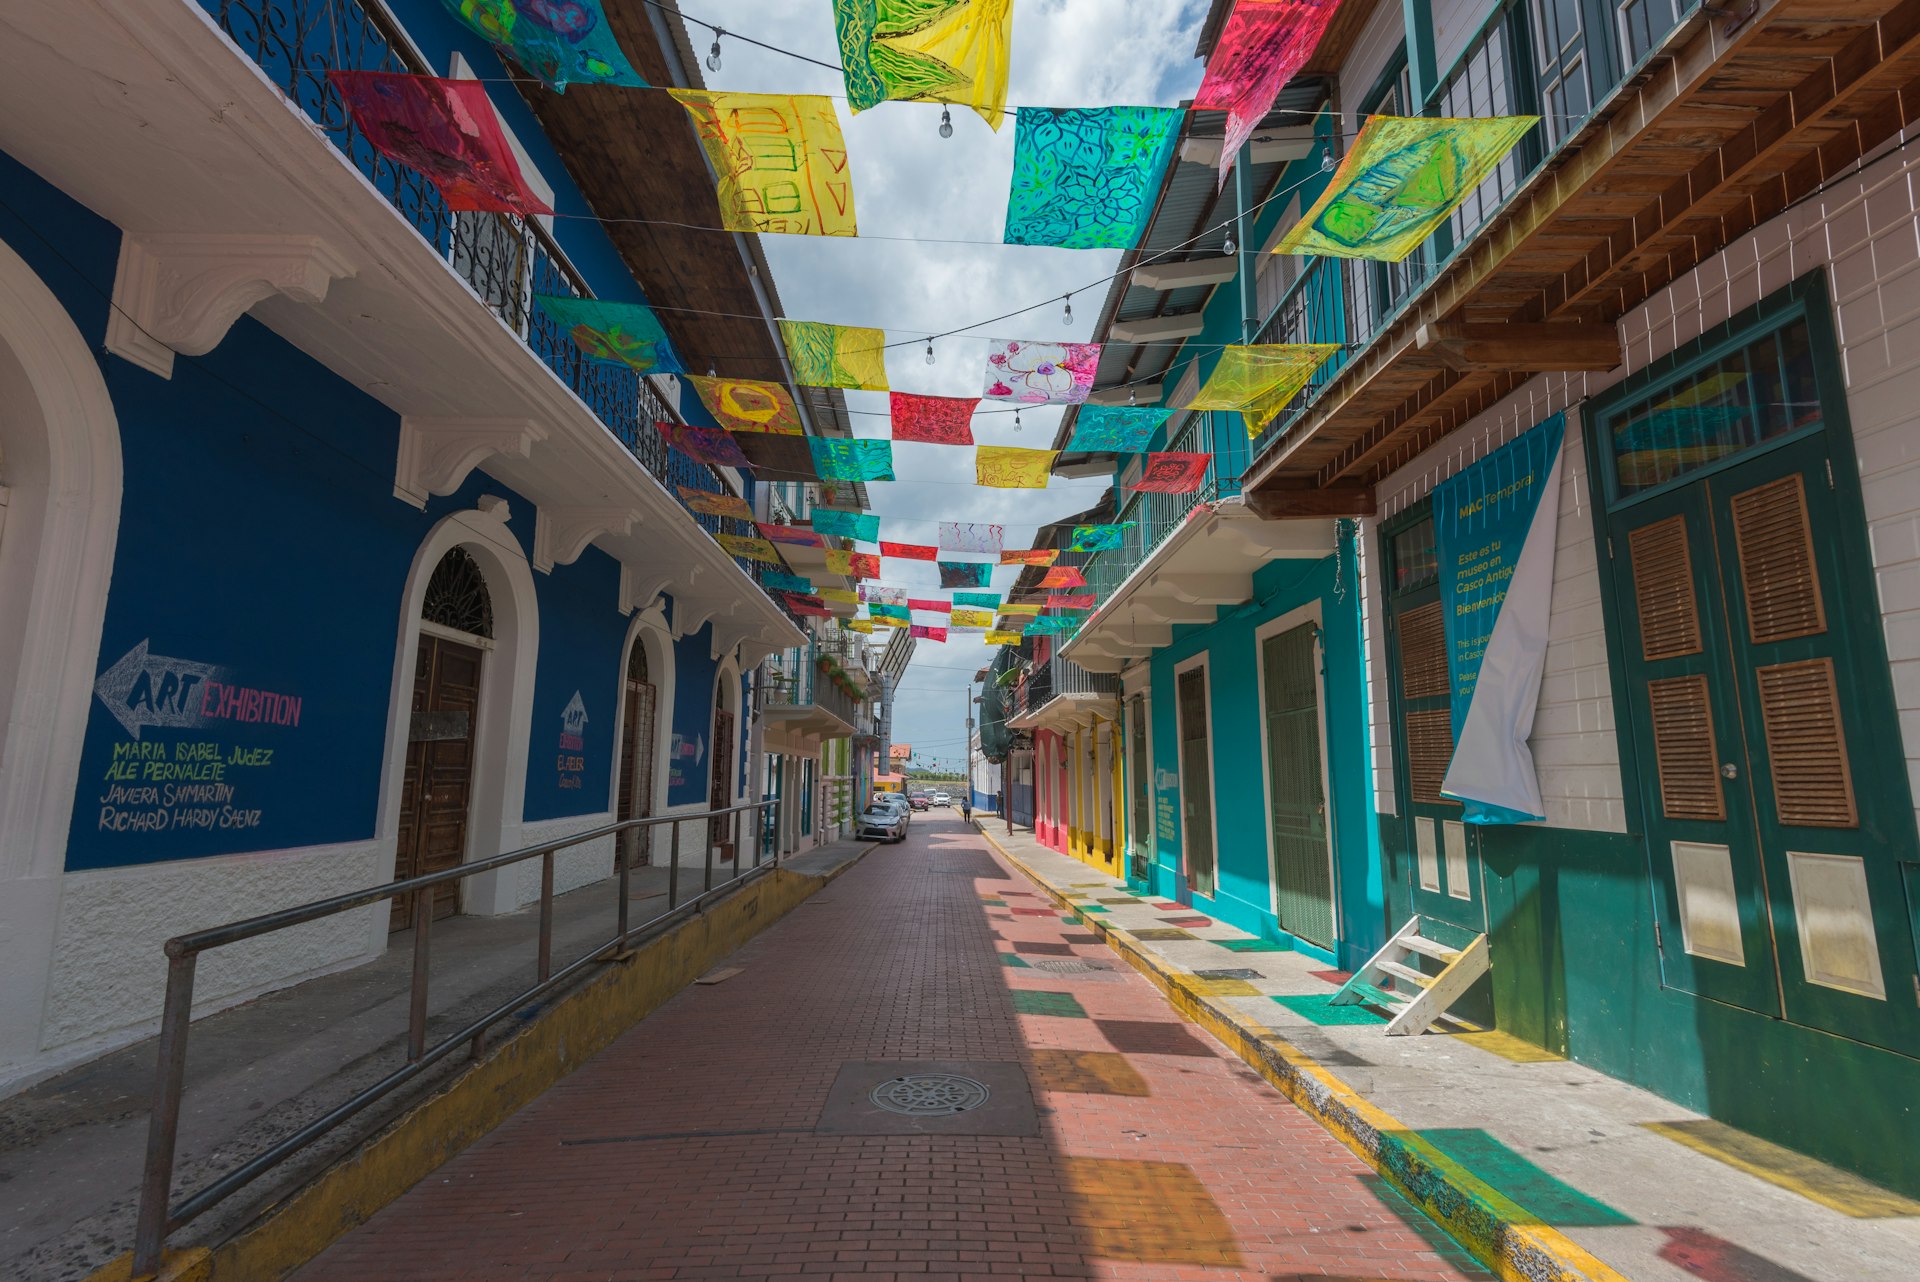 A brightly decorated block in Panama City captures the energy and charm of the city's art galleries